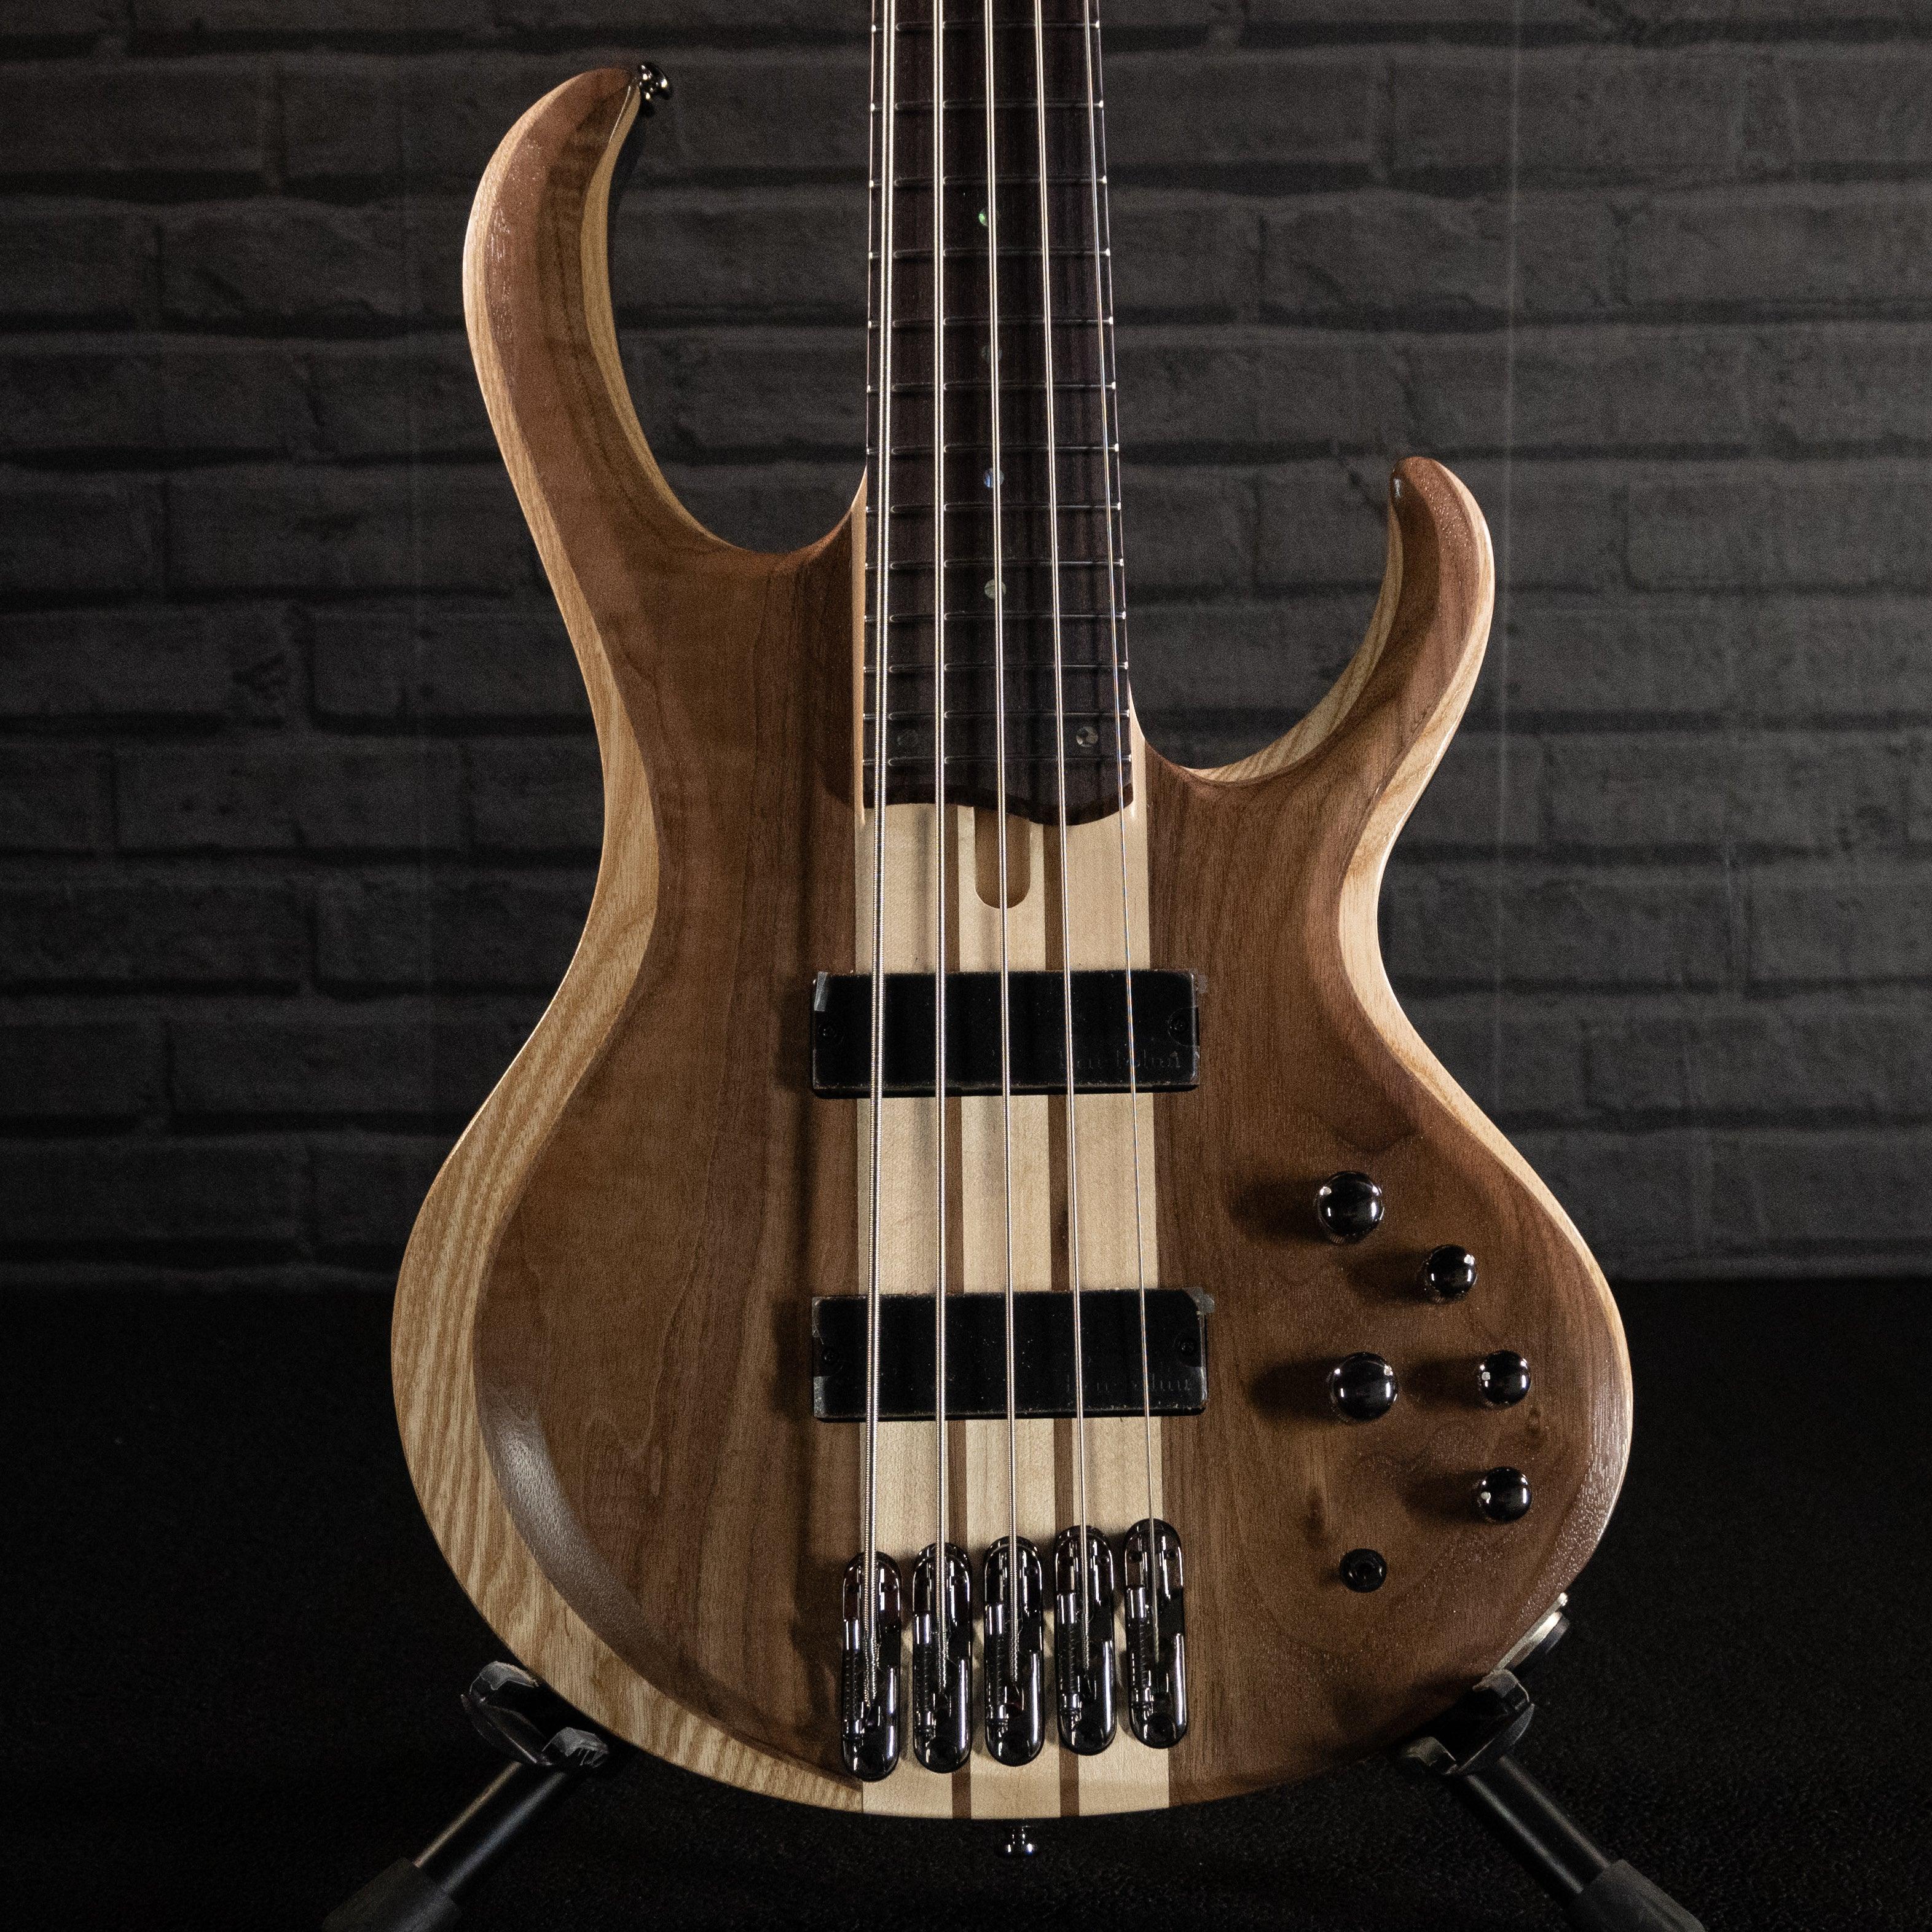 Ibanez Standard BTB745 5-String Electric Bass Guitar (Natural Low Gloss) - Impulse Music Co.